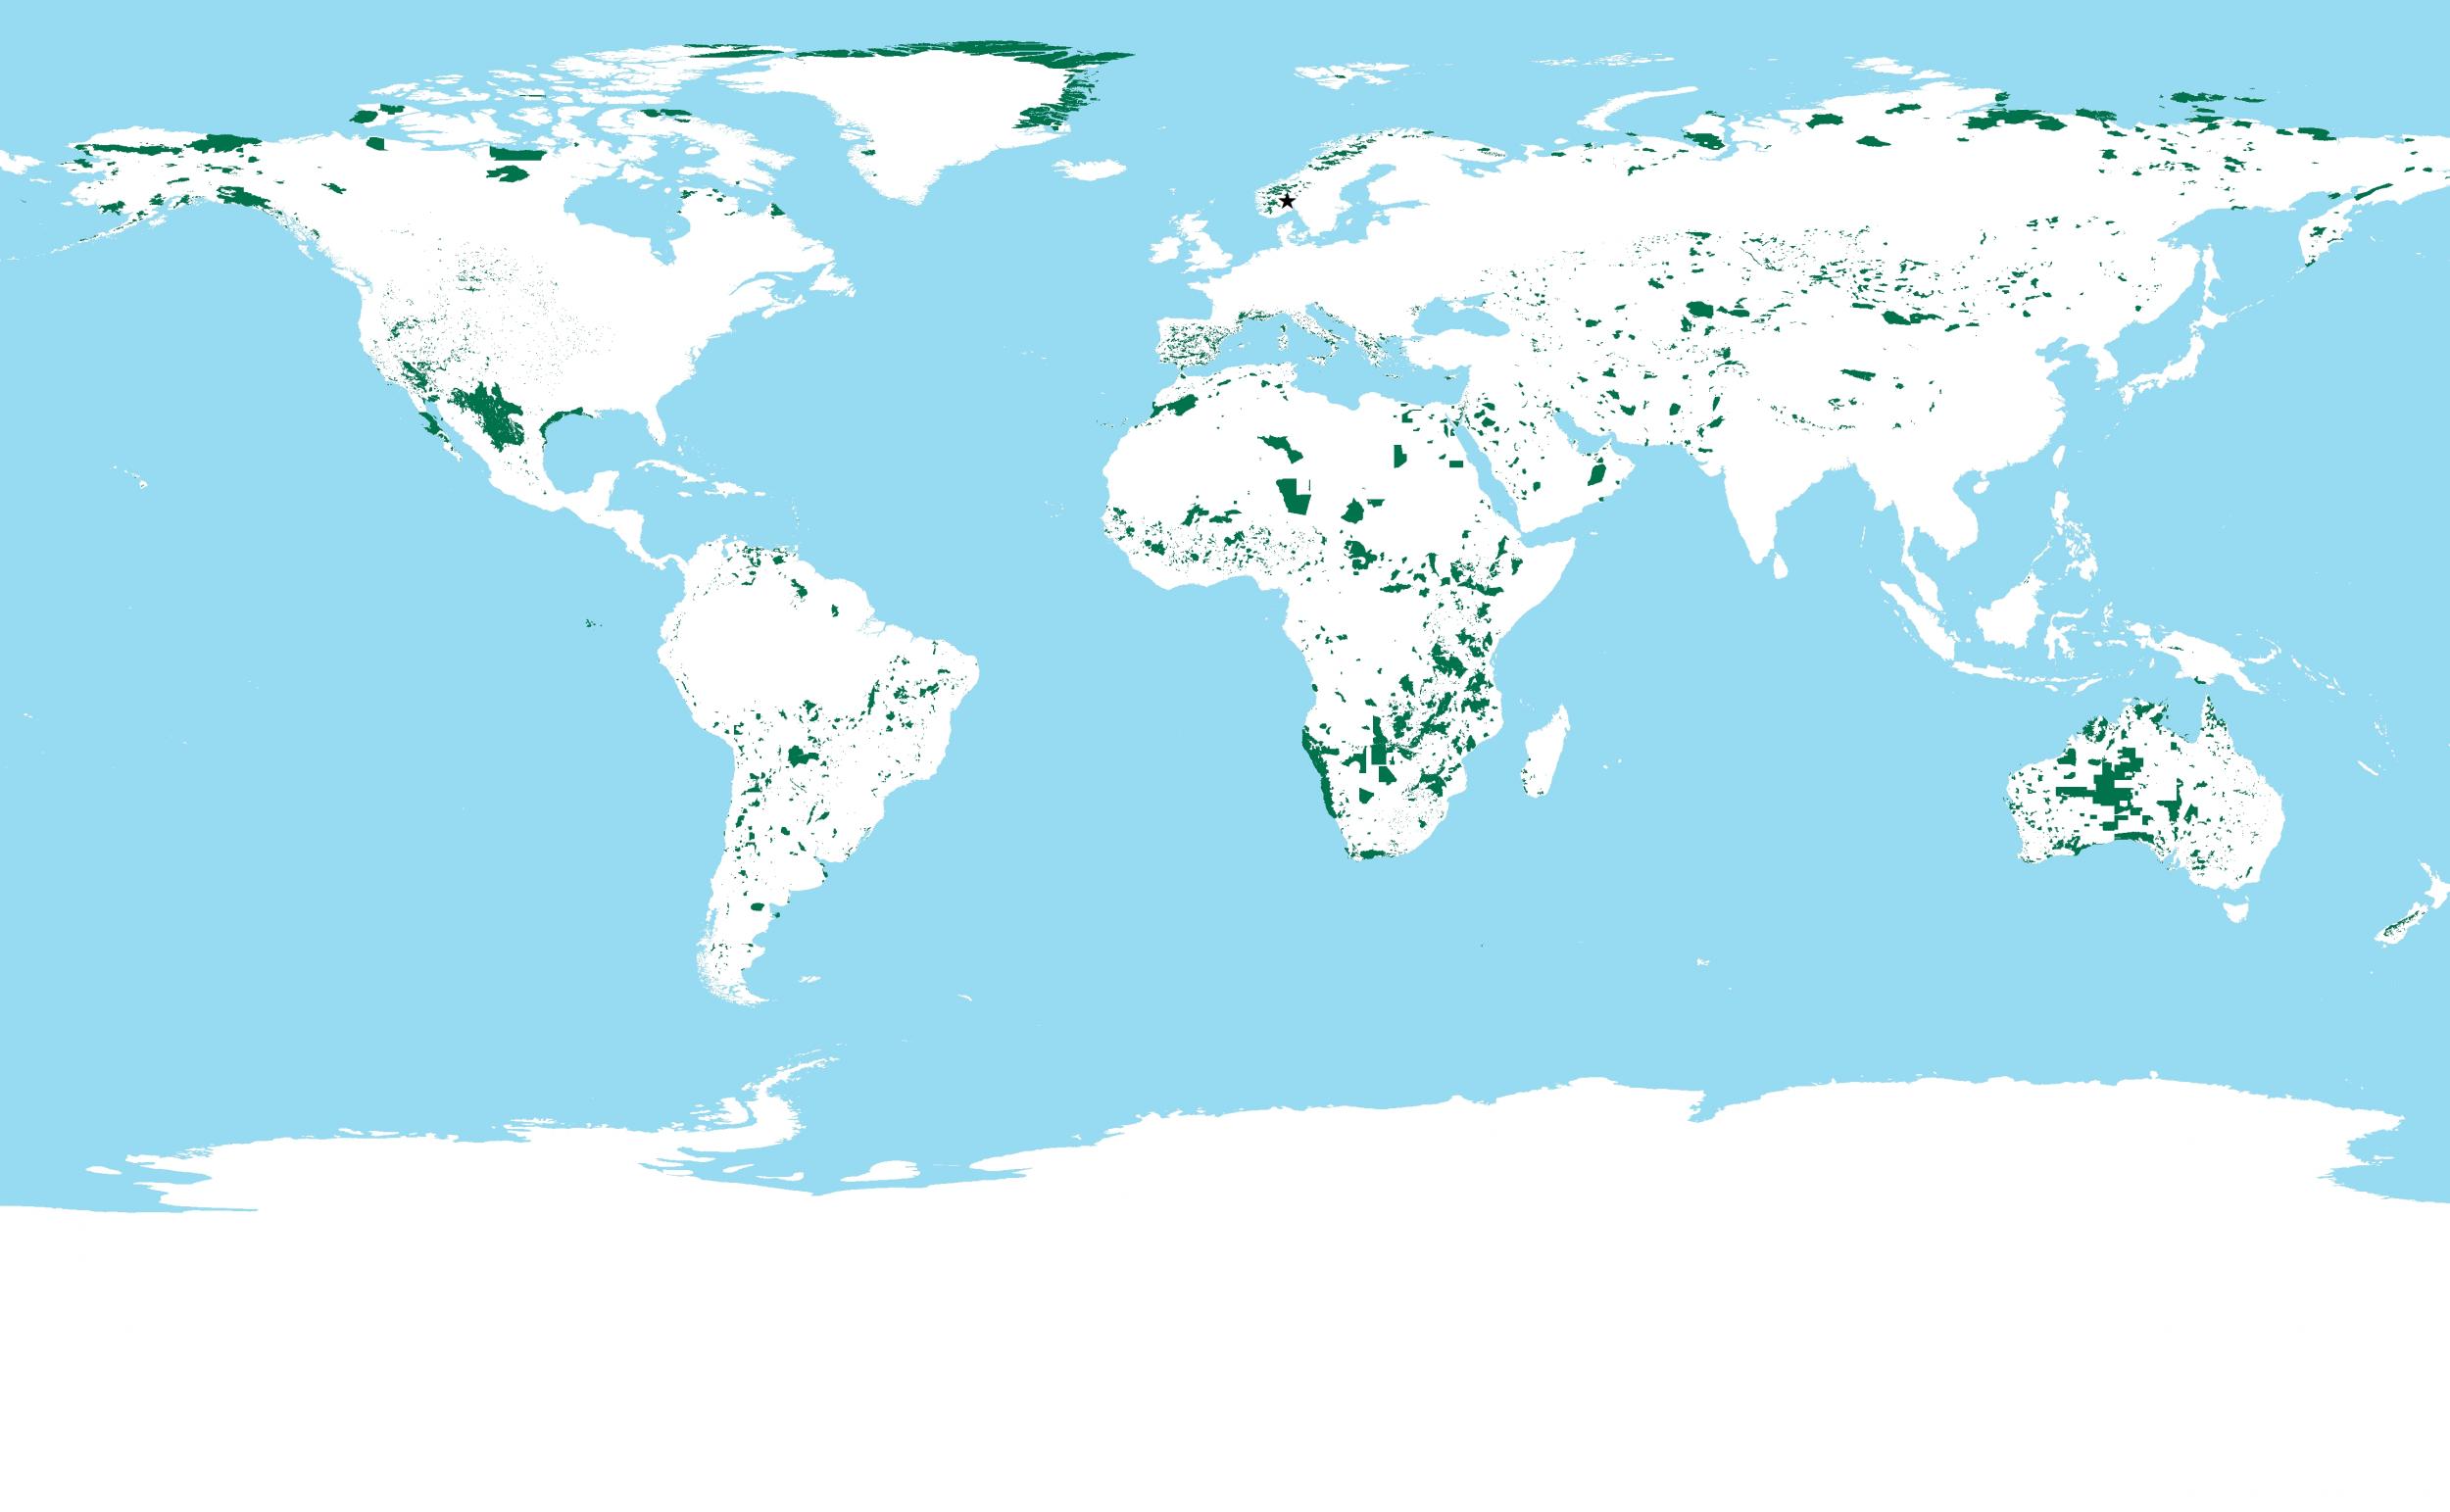 Terrestrial protected areas found in rangelands globally